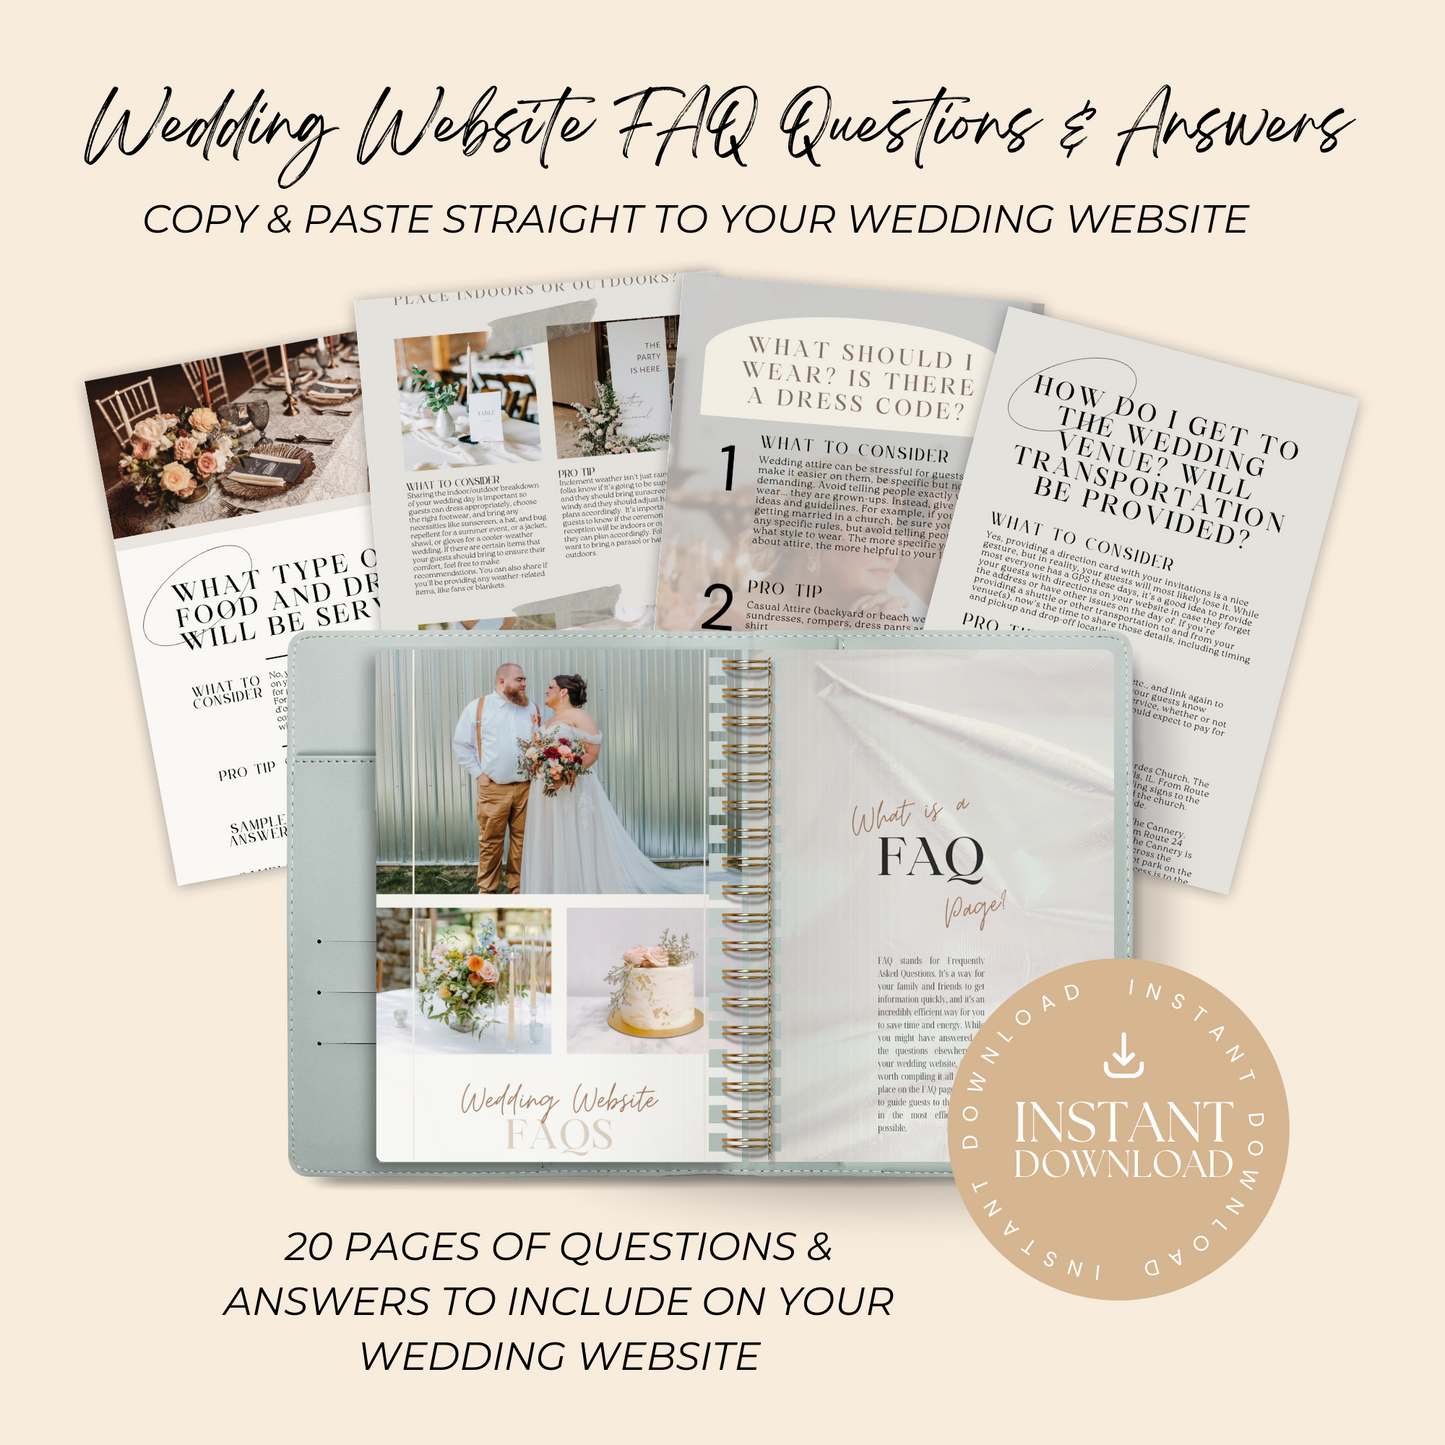 COPY & PASTE Wedding Website Frequently Asked Questions and Answers | Wedding Website FAQ's with Sample Answers | Instant Download